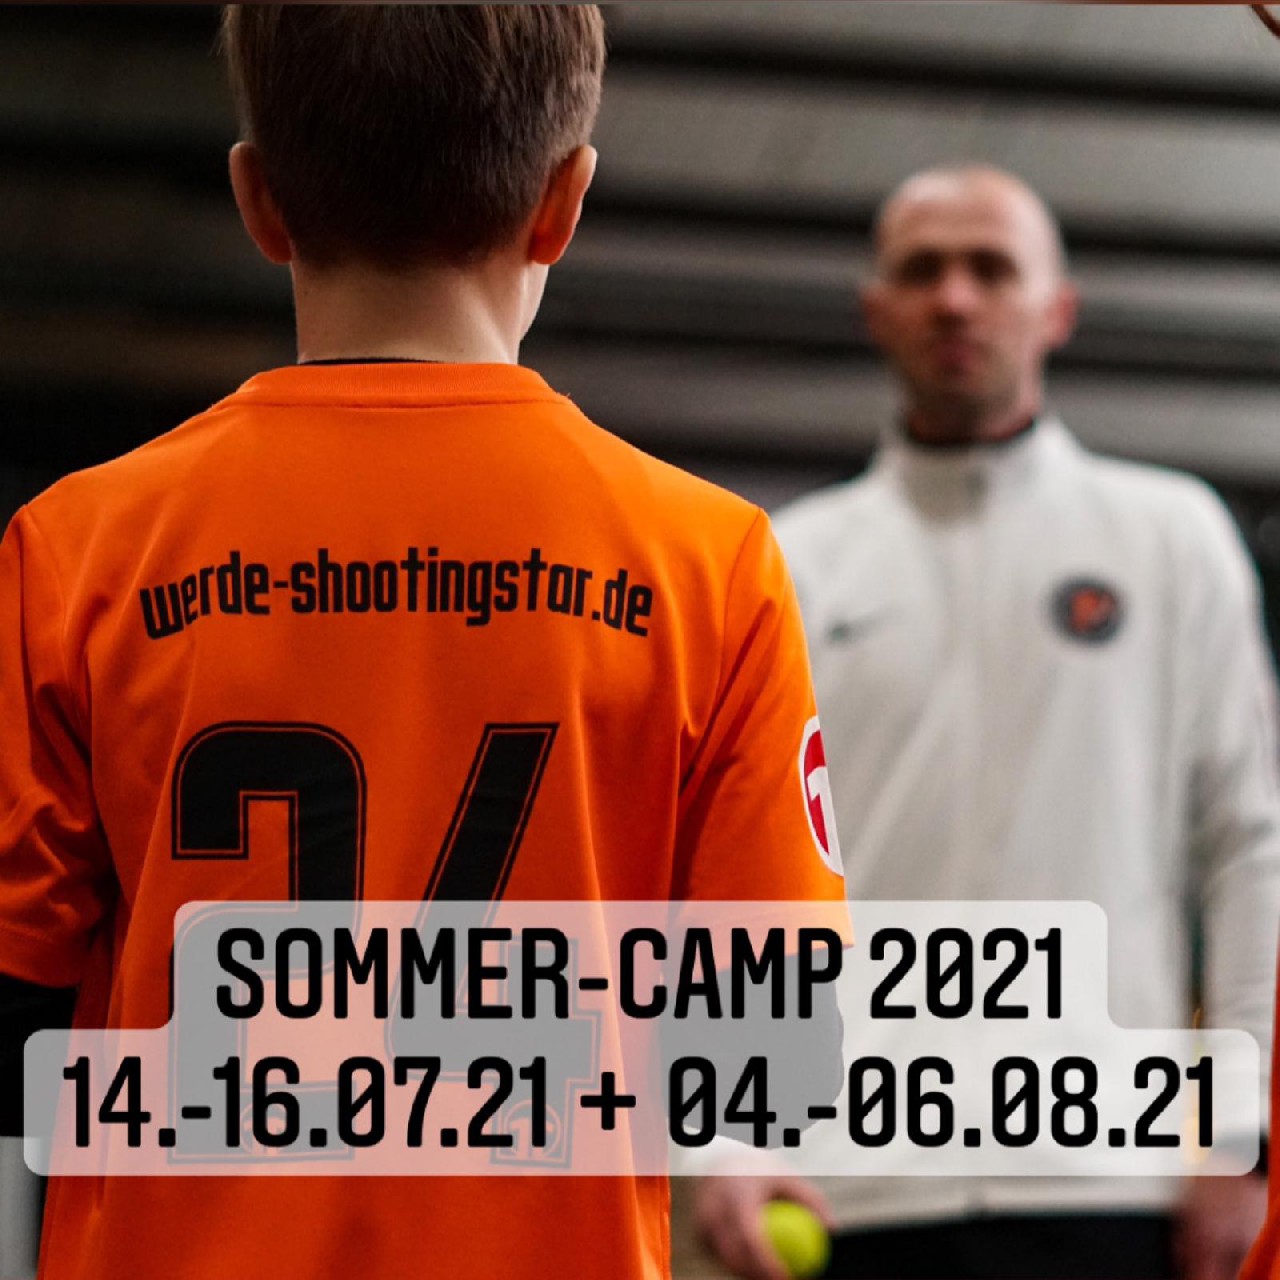 Shooting Star Sommer-Camp in Hiltrup